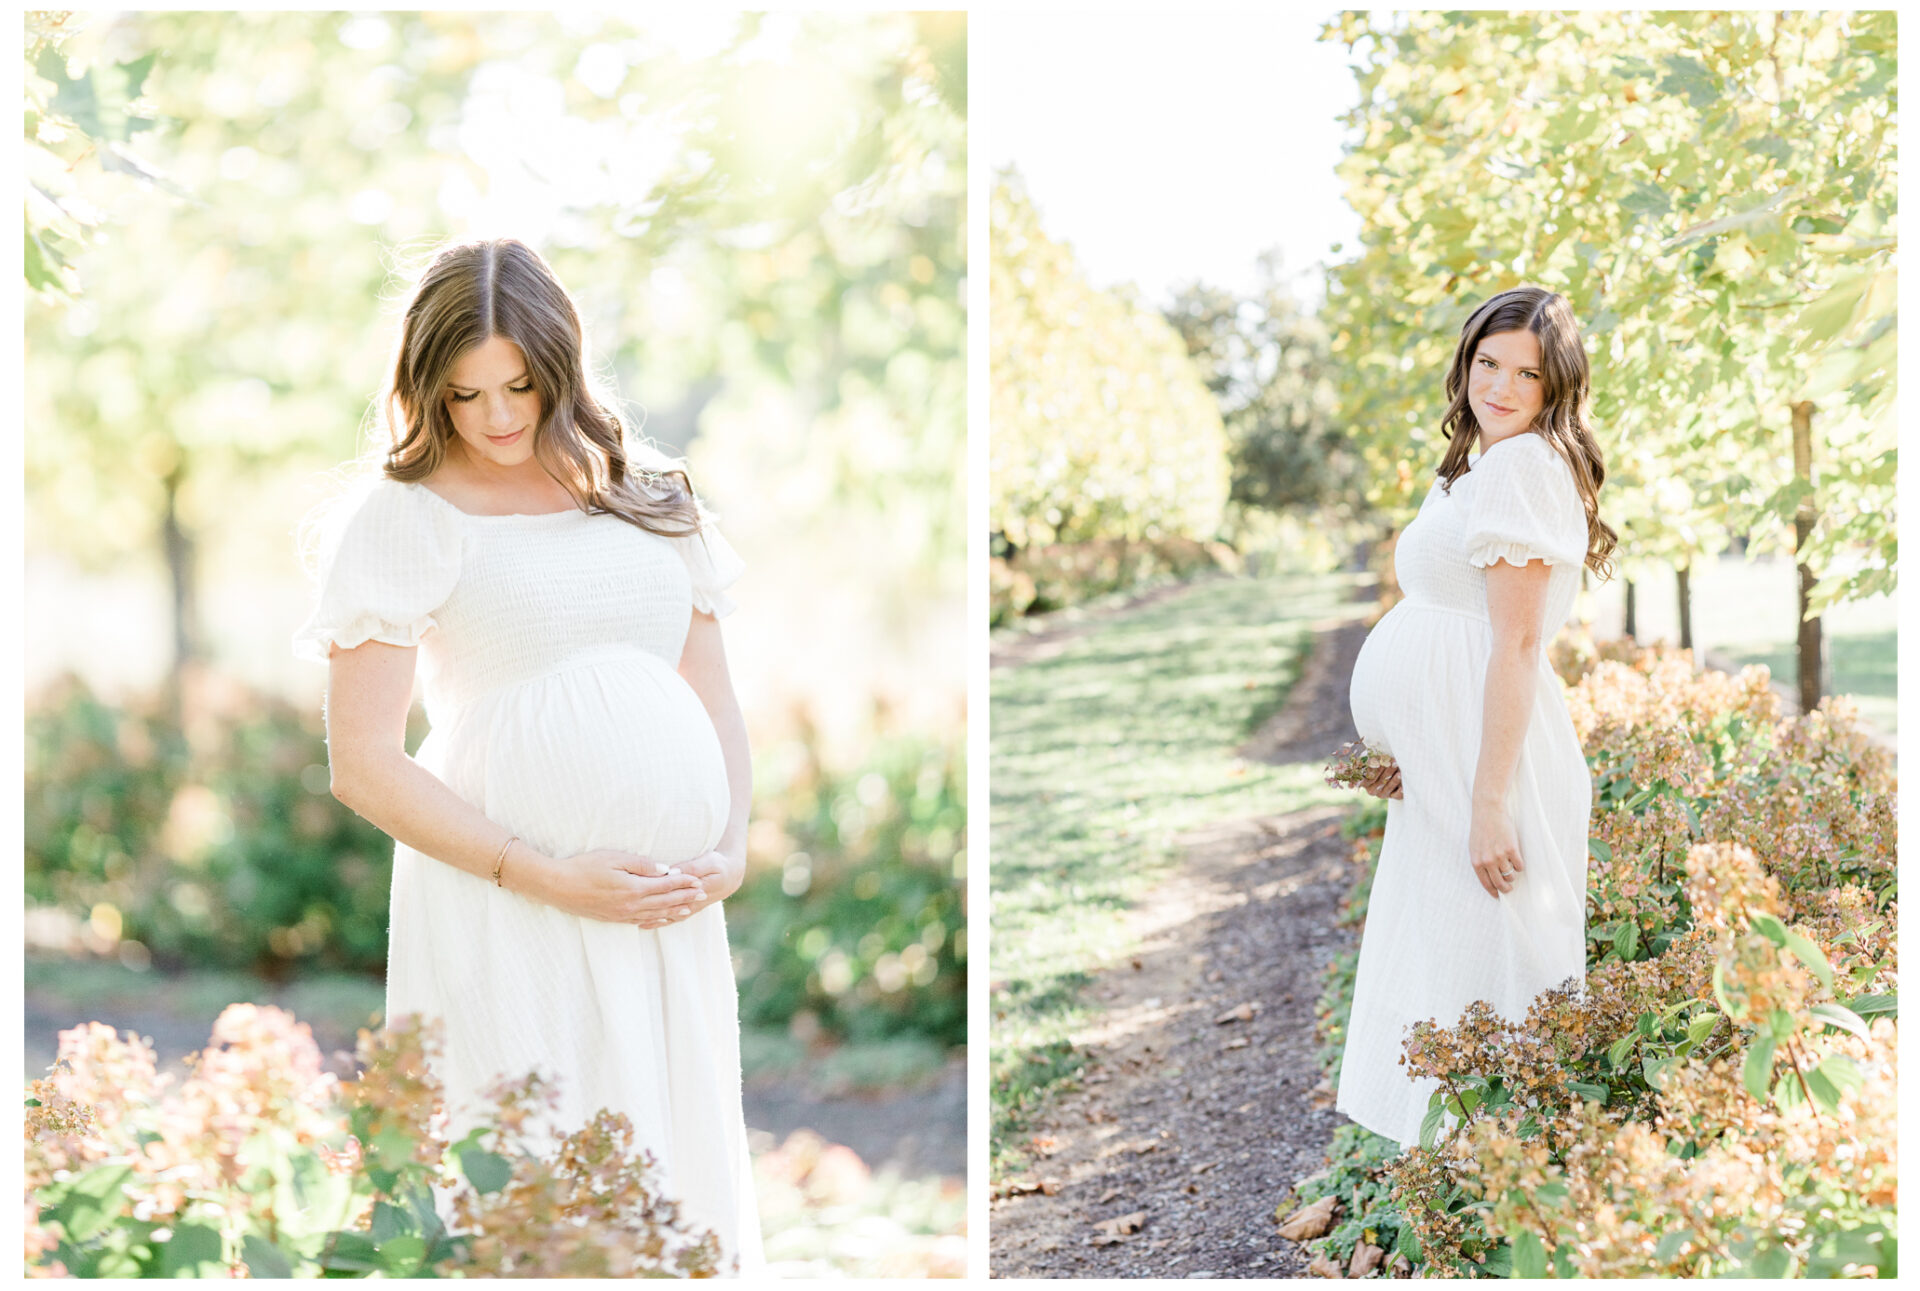 Winter Freire Photography | Natural Light Filled Maternity Session Dayton, OH | Organic Family Photography Ohio